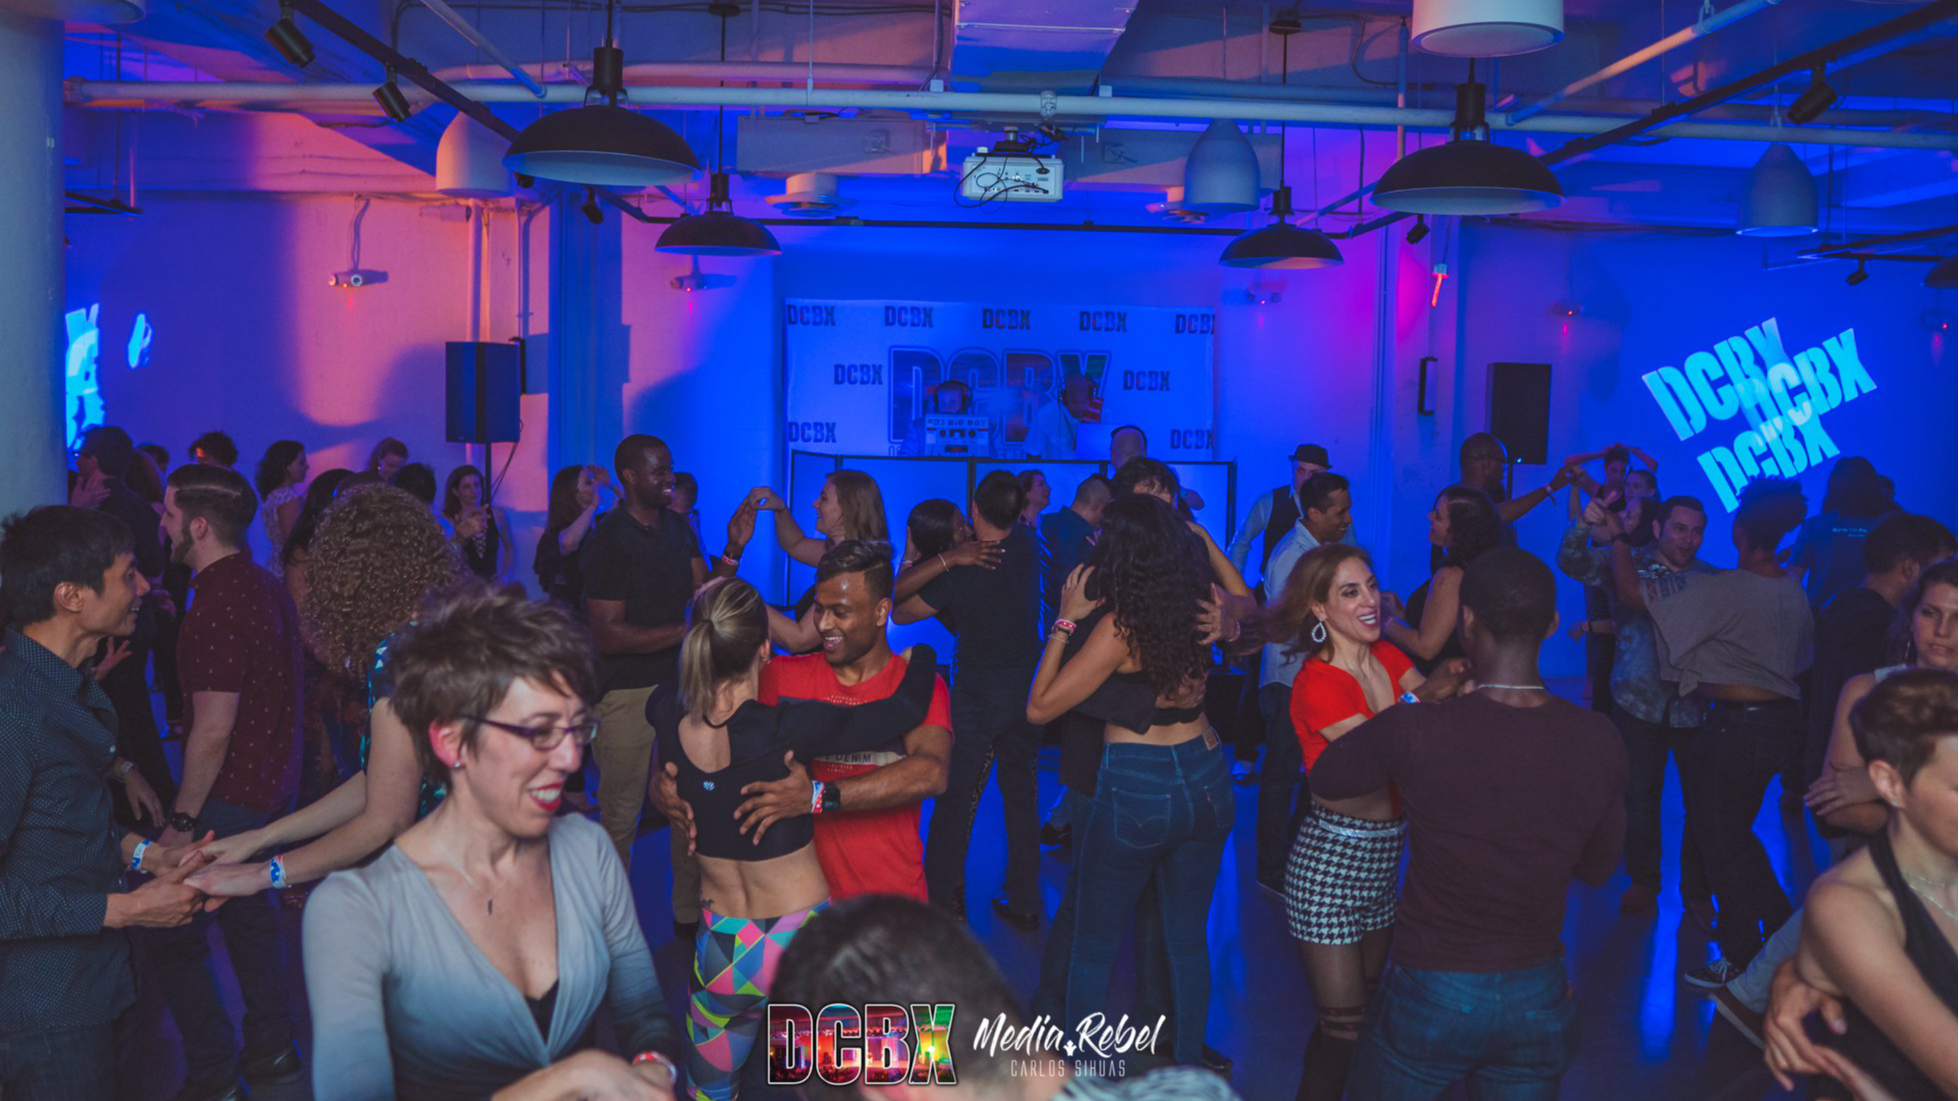 Photo for DCBX BACHATA WINTER Bash Sensual Movement NYC Take Over, SOS  + Gringuito's B-Day on ViewStub